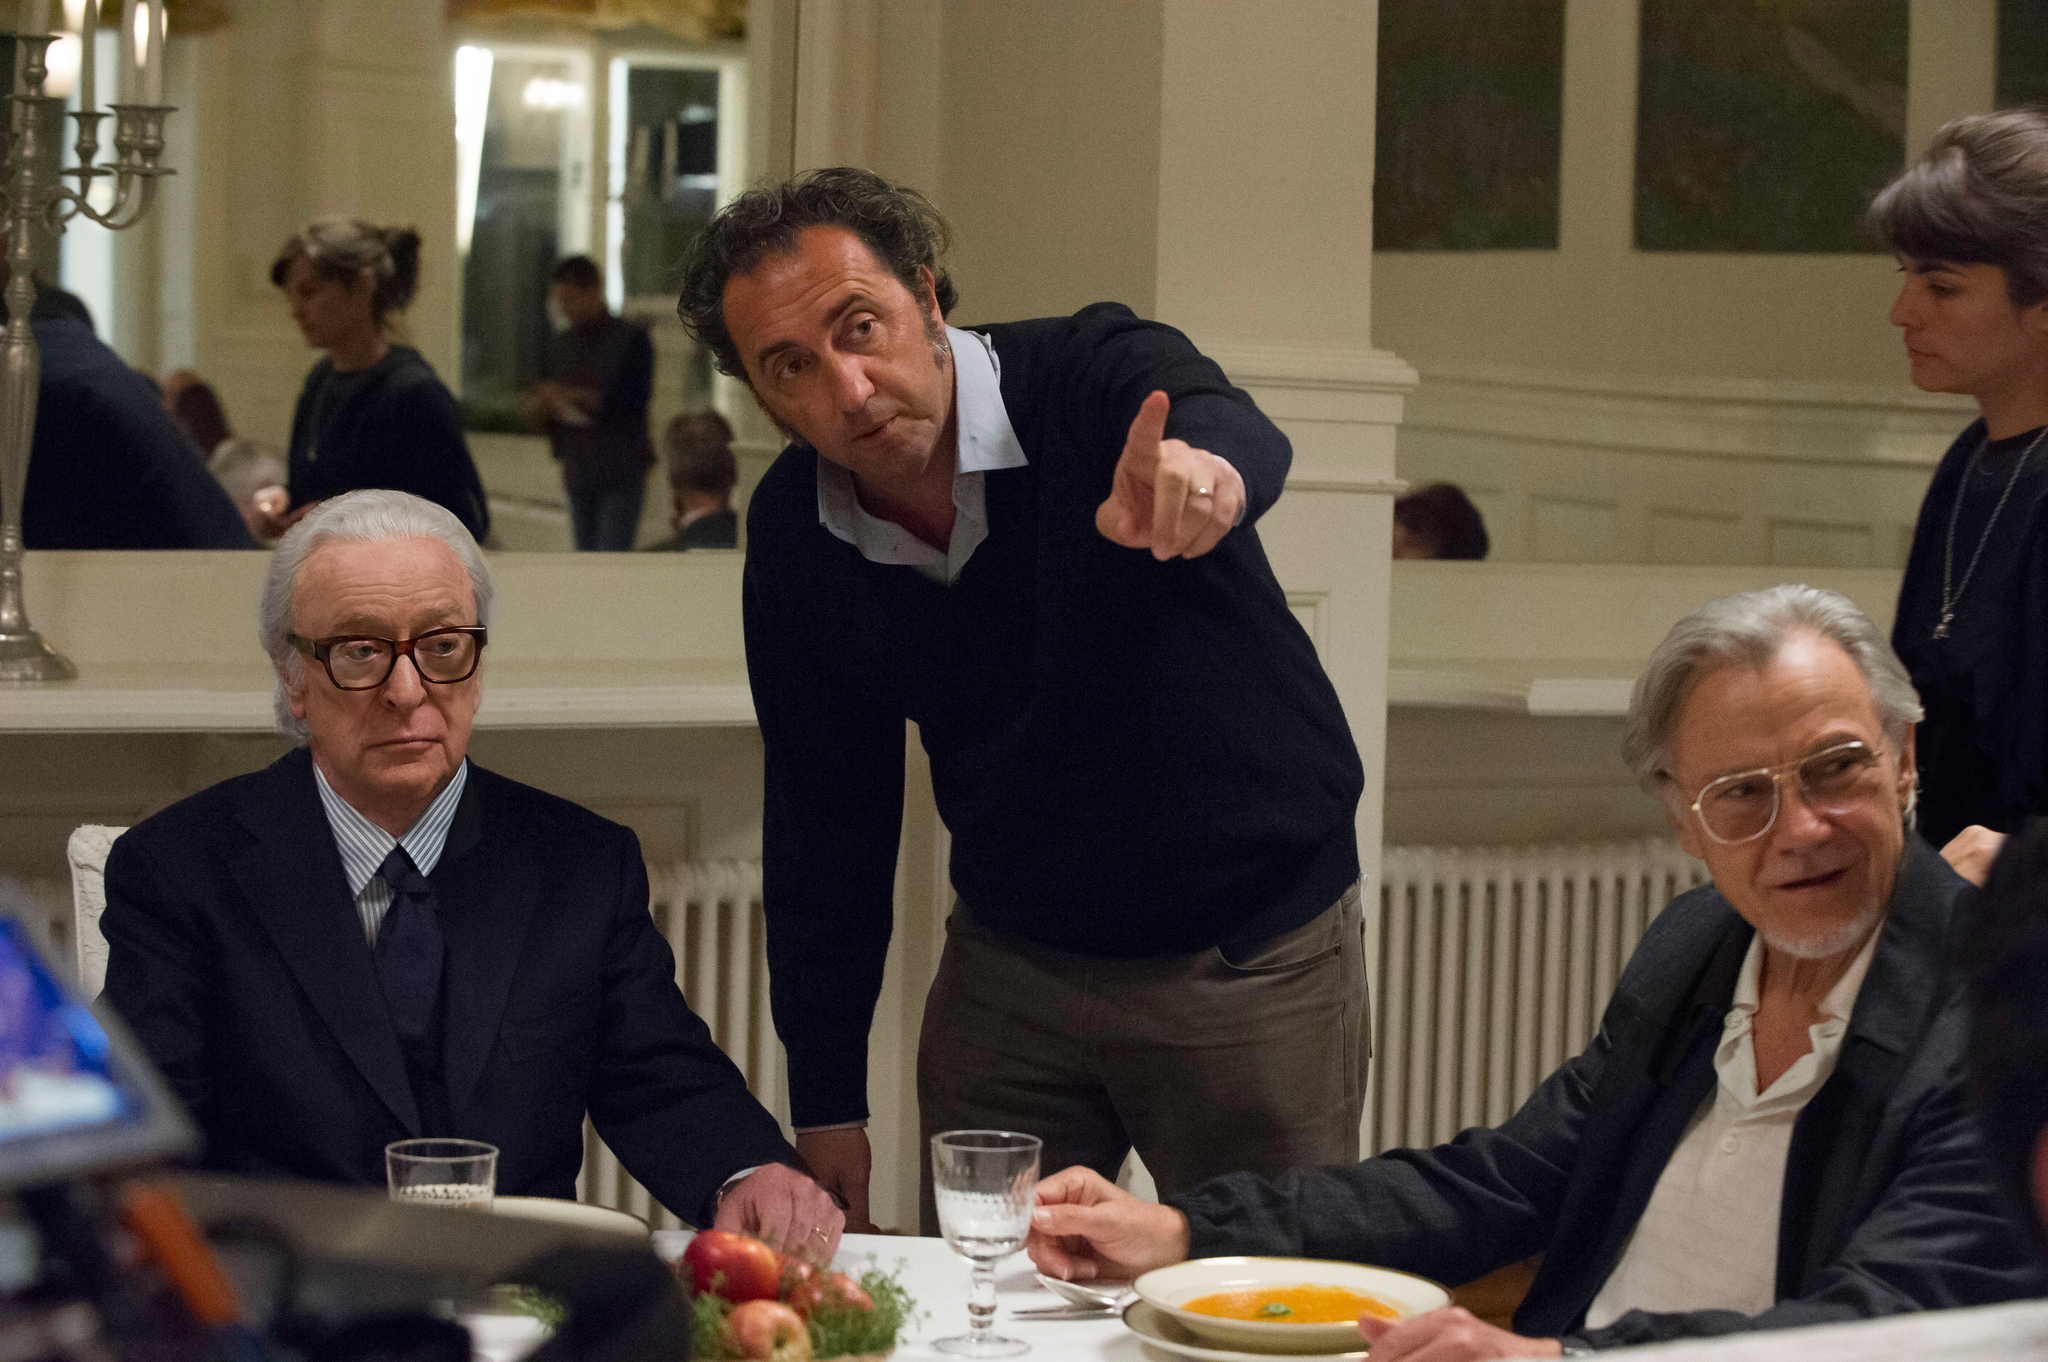 Harvey Keitel, Michael Caine and Paolo Sorrentino in Jaunyste (2015)